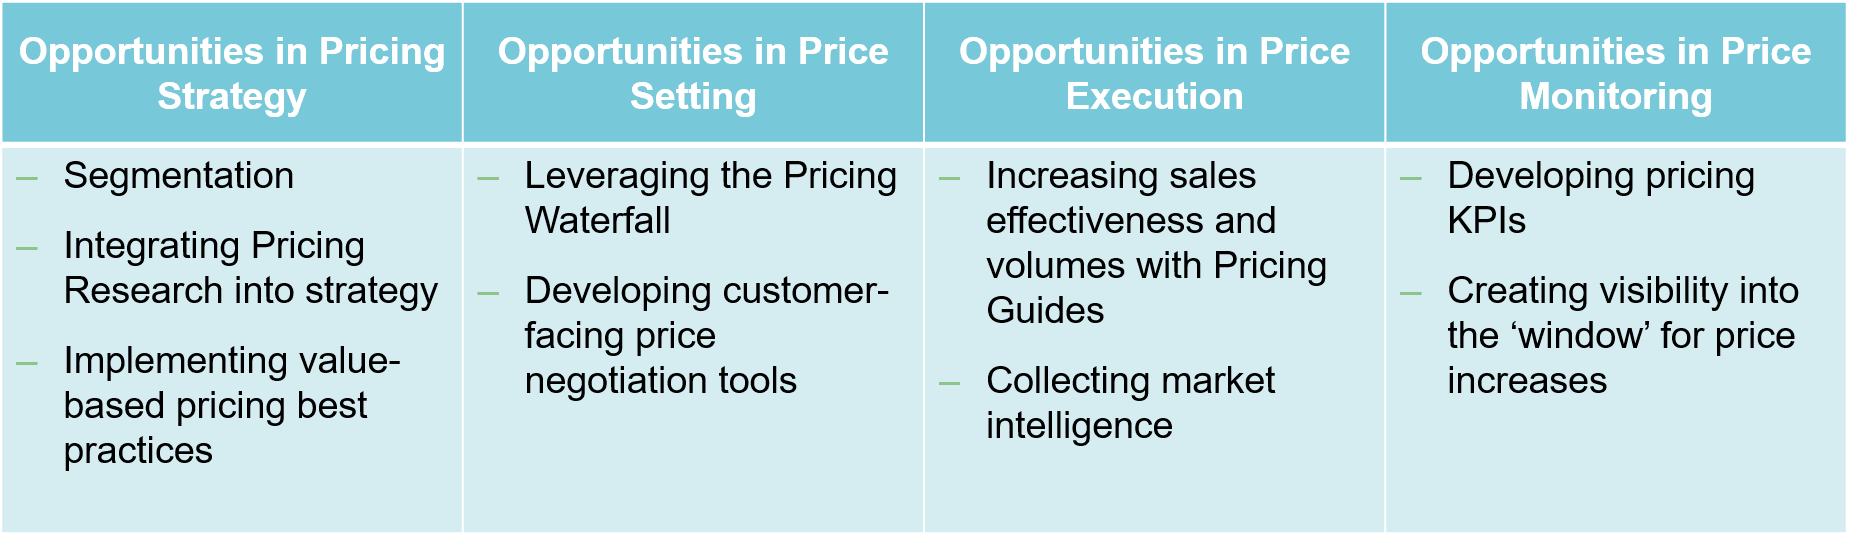 pricing opportunities for oil & gas client